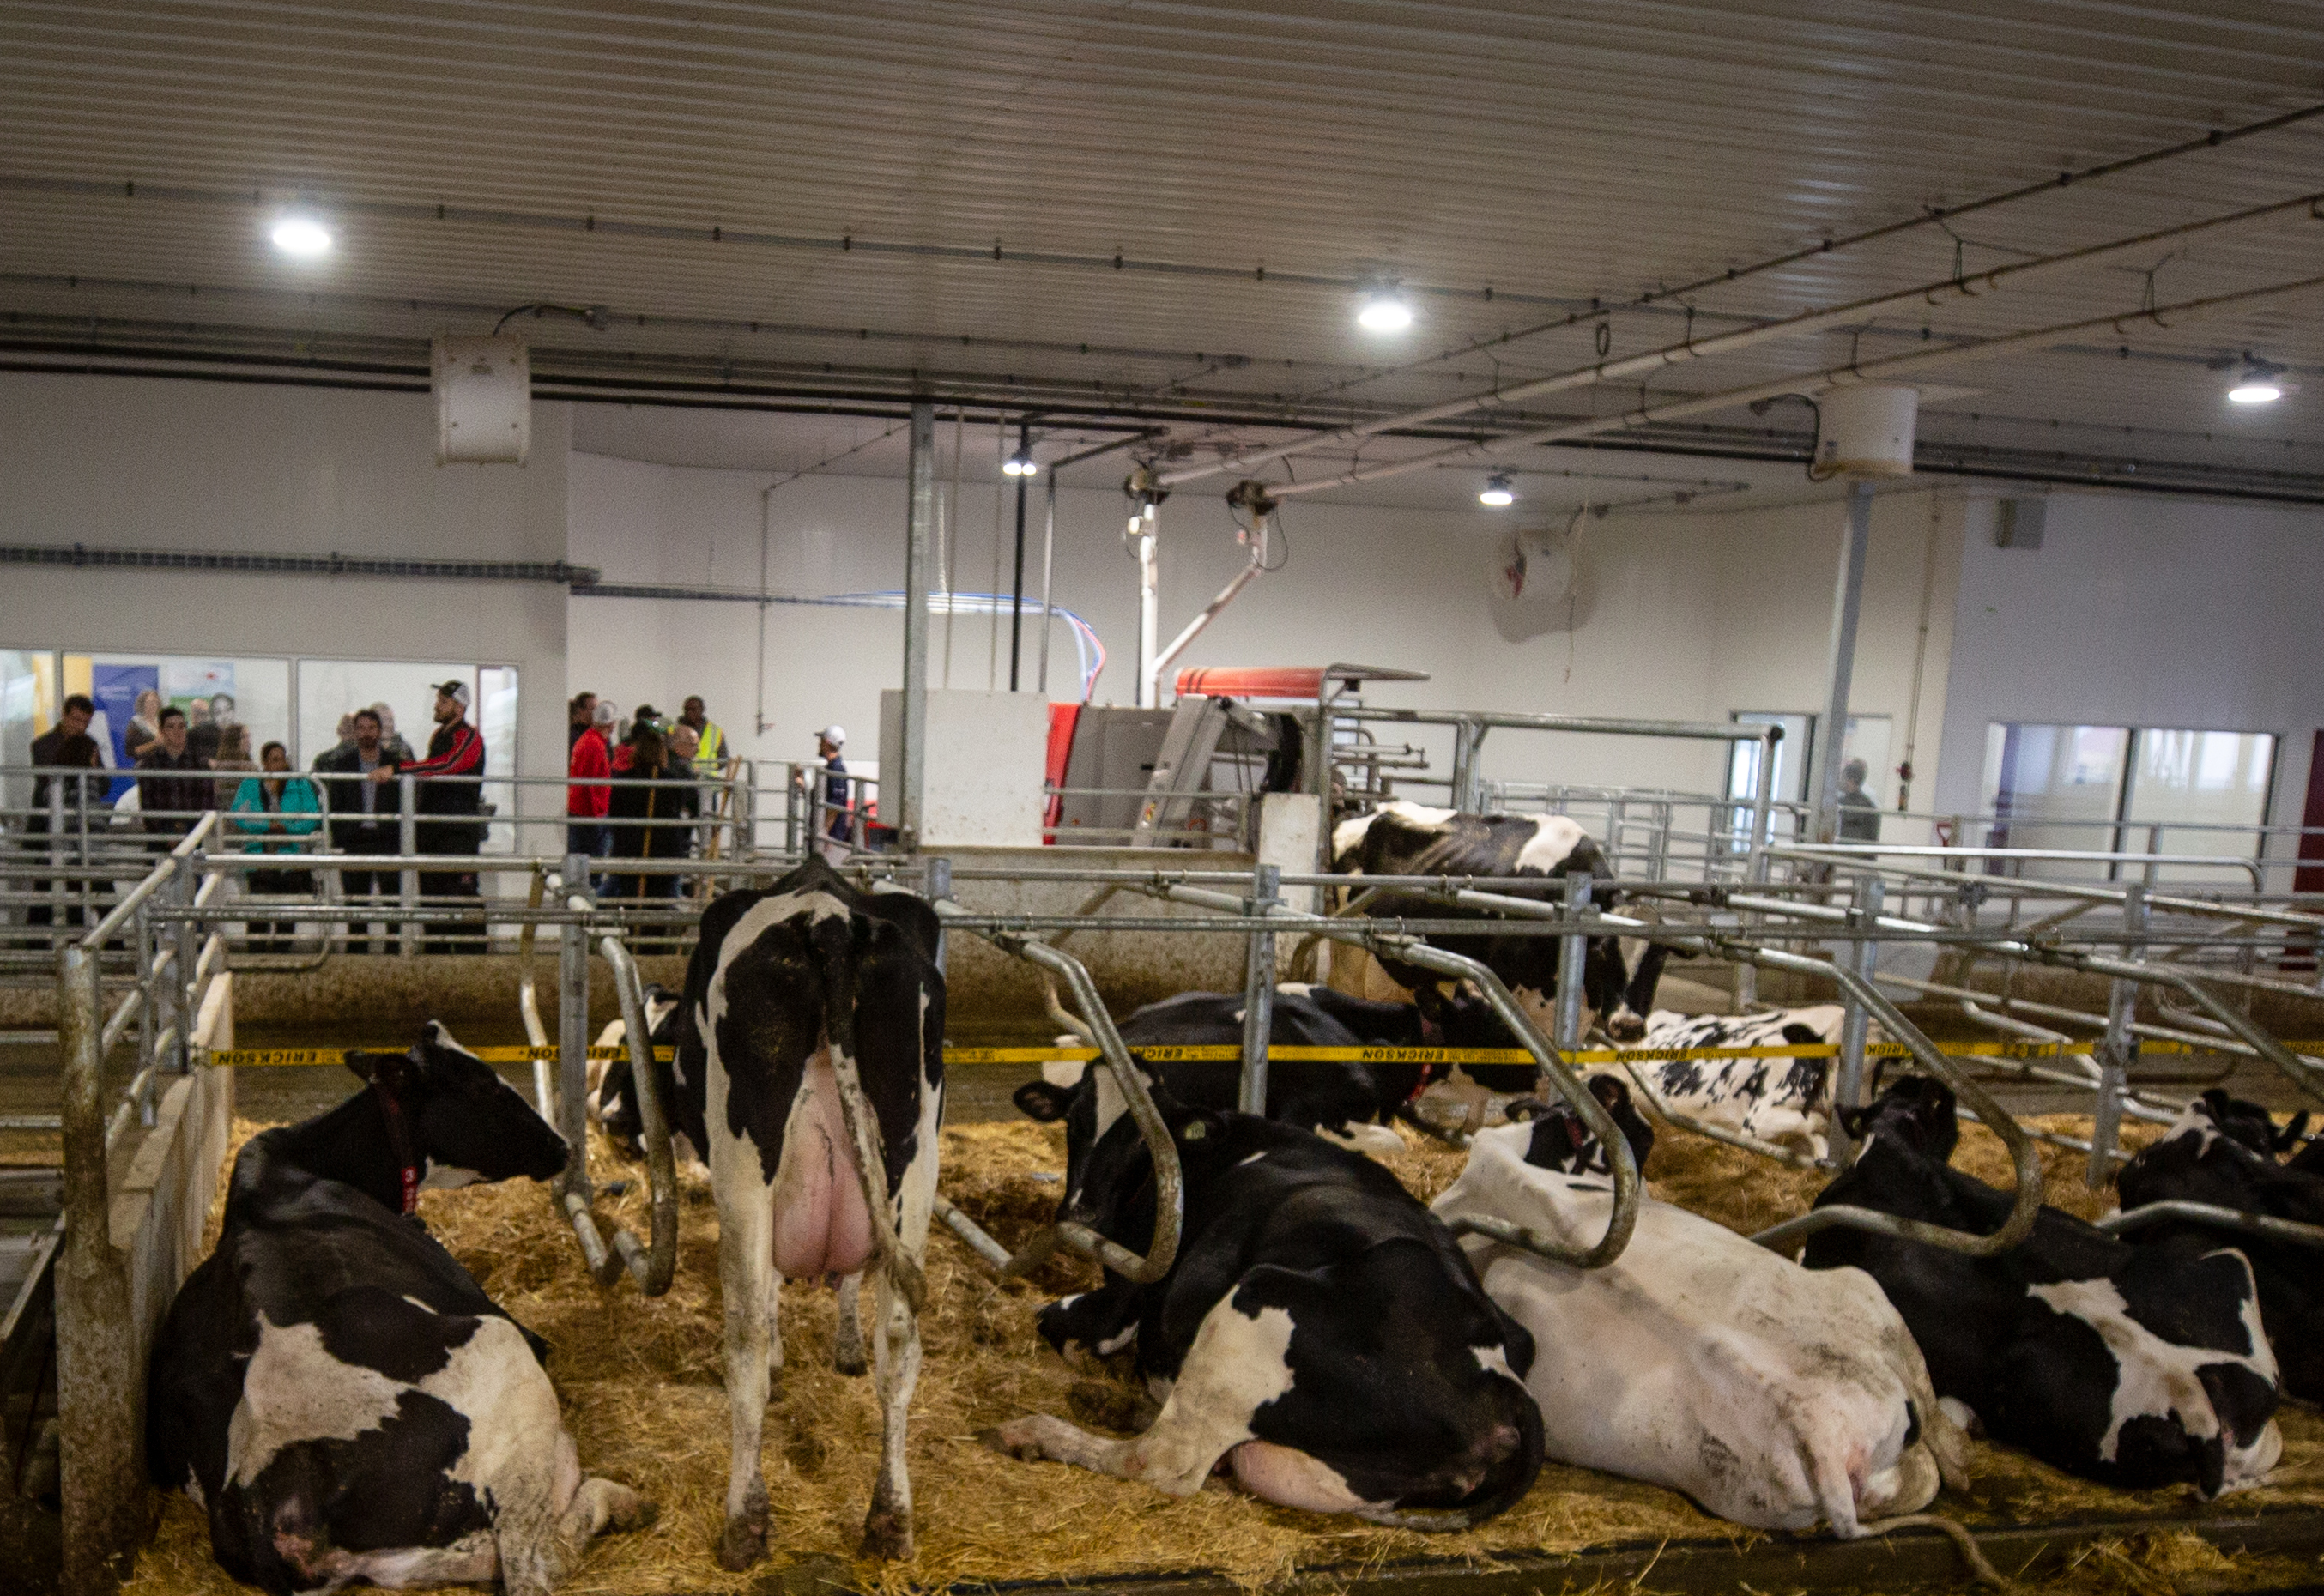 Researchers will be able to individually manage multiple groups of animals in a free-stall setting